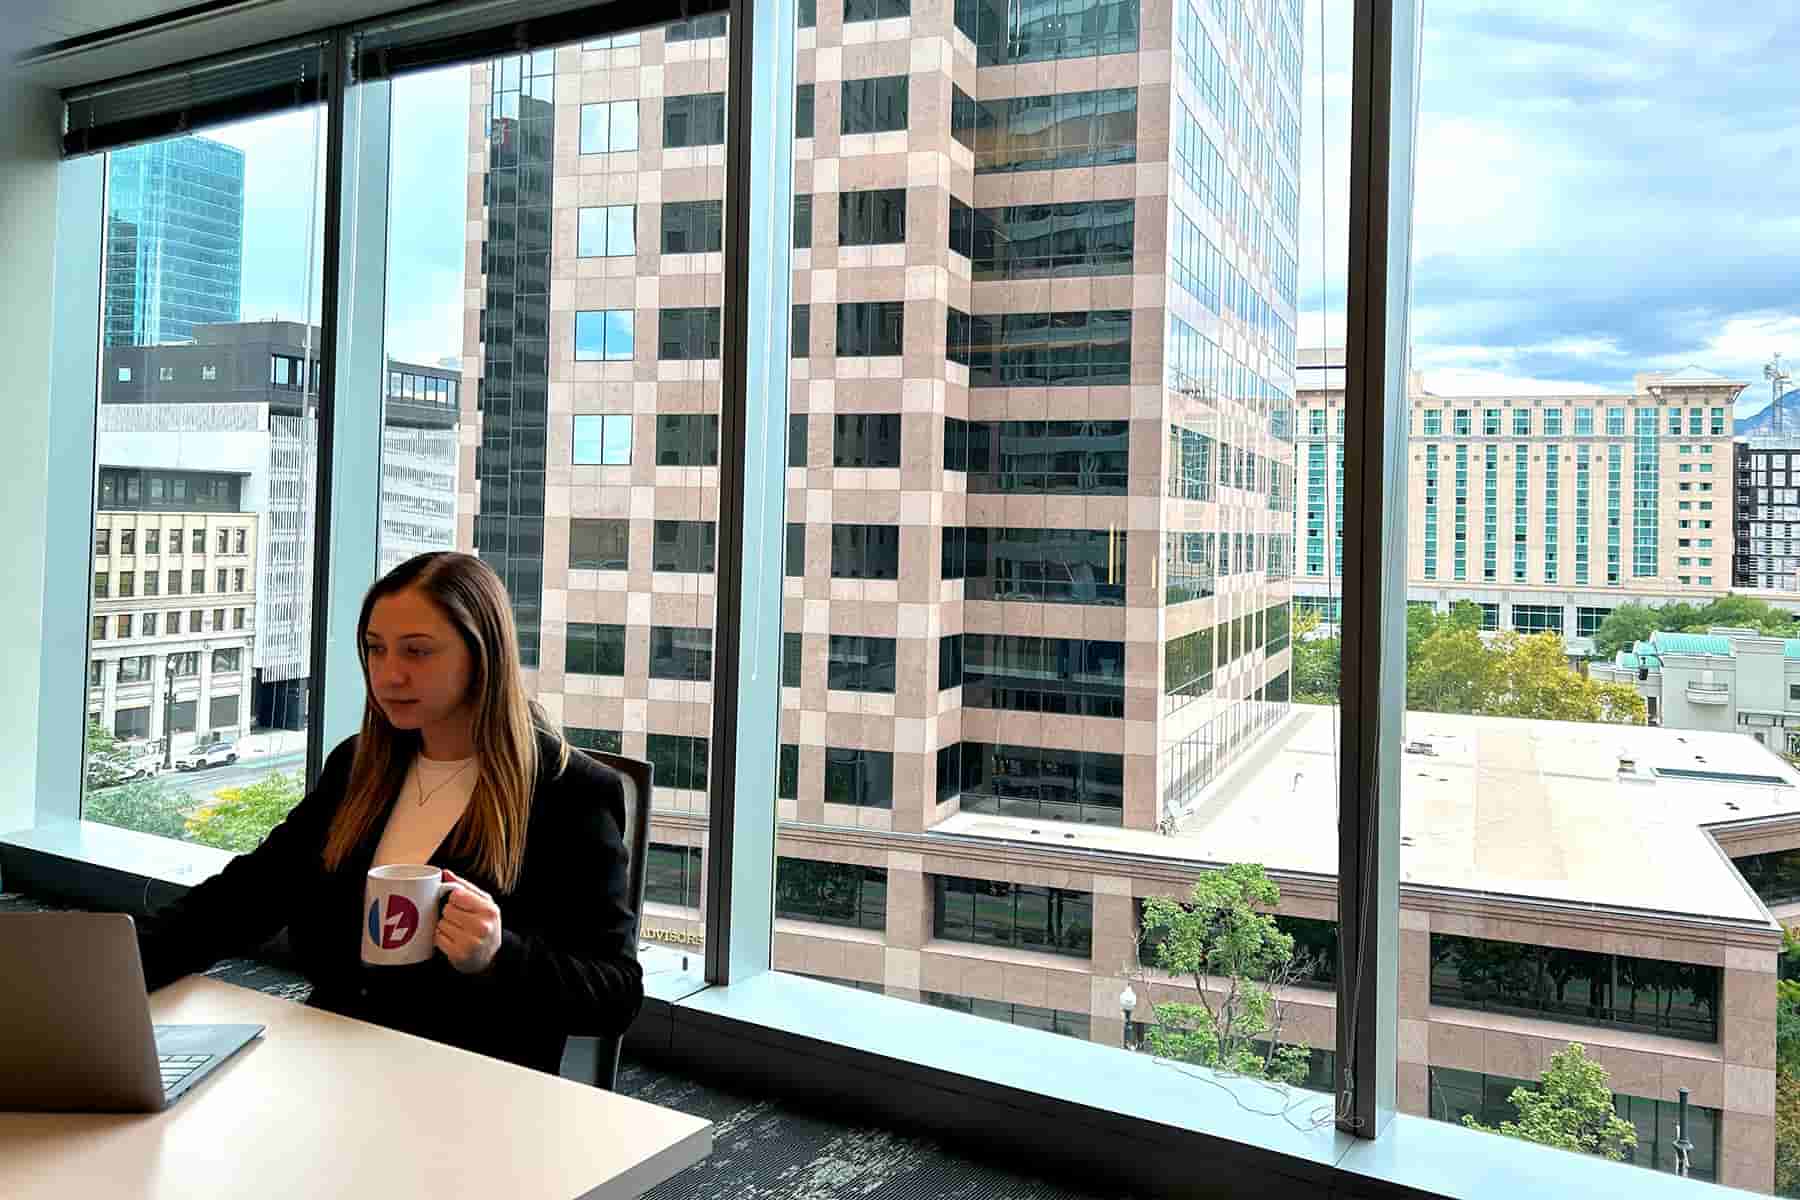 A photo featuring Valentina enjoying a cup of coffee in the Kaizen Softworks Salt Lake City office, with a scenic view of the cityscape visible through the office window.